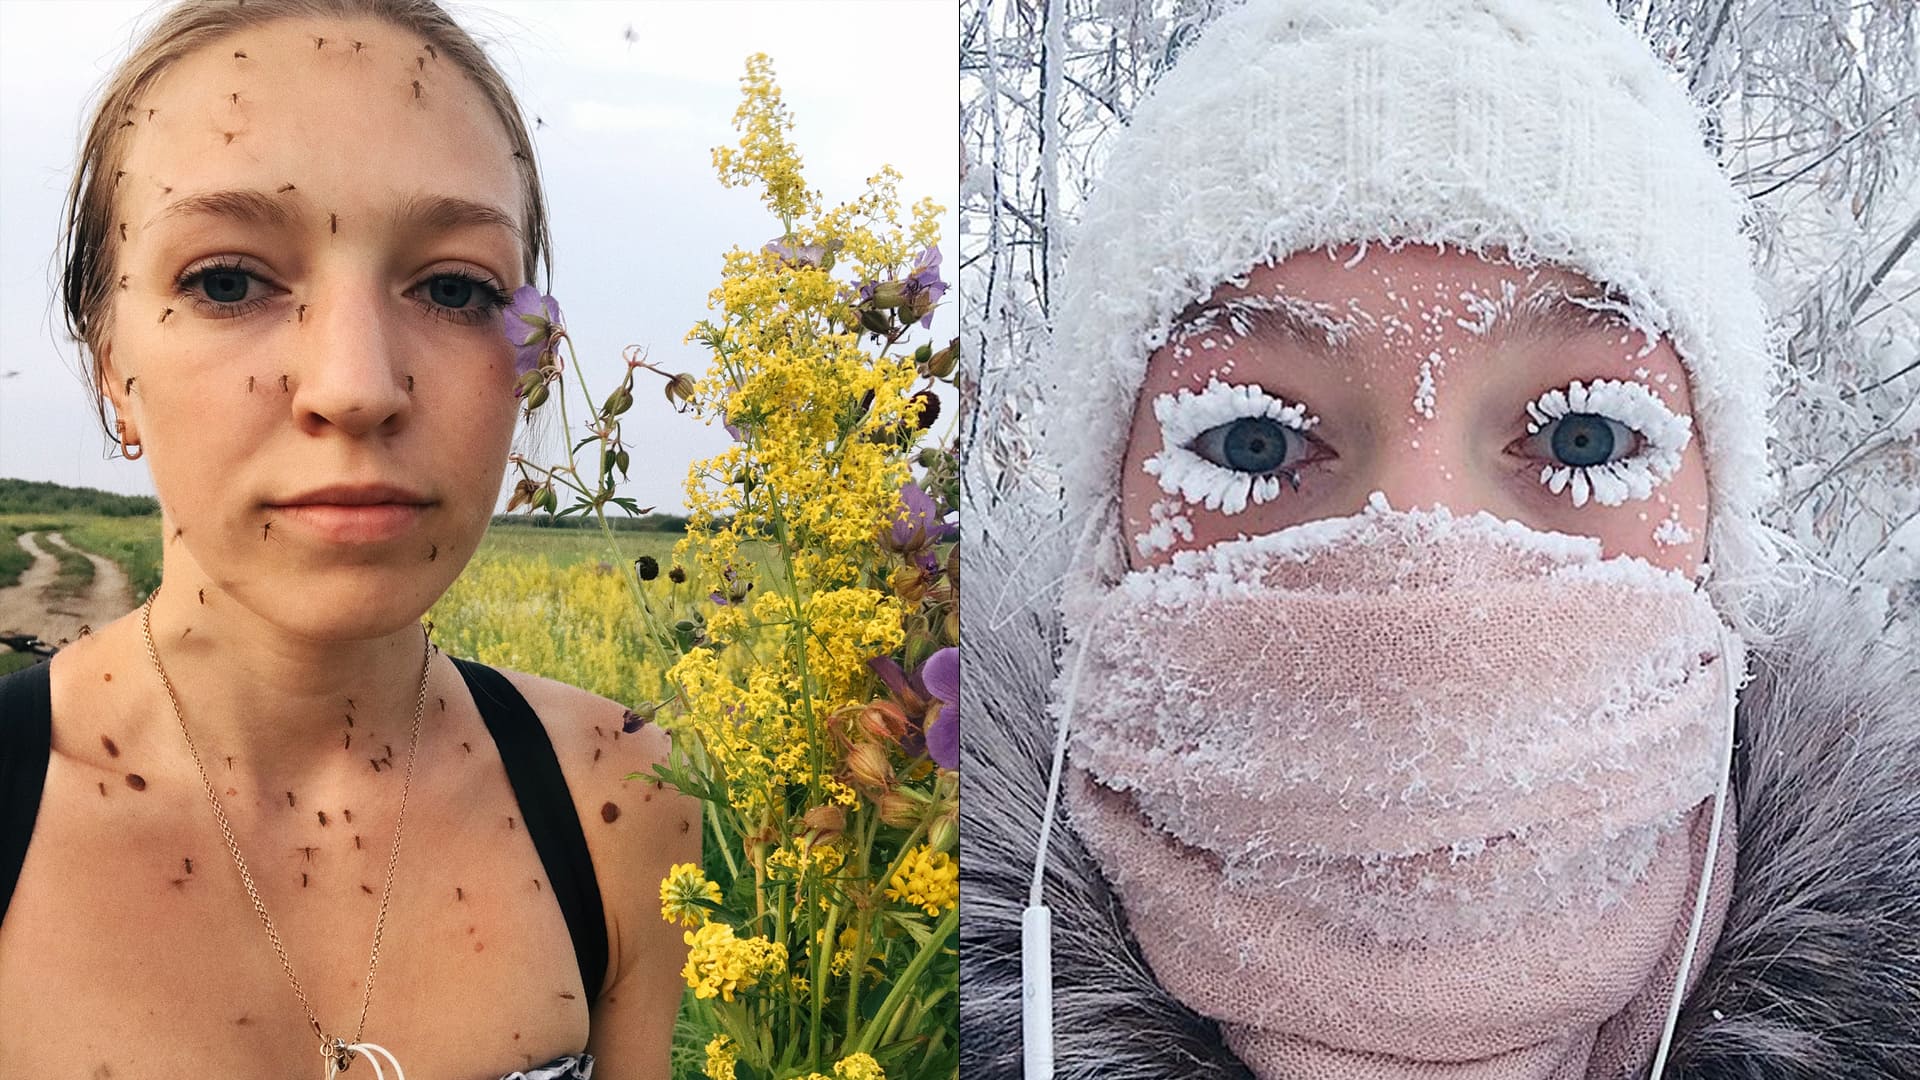 After icy-eyelashes, Russian girl takes internet by storm with this picture